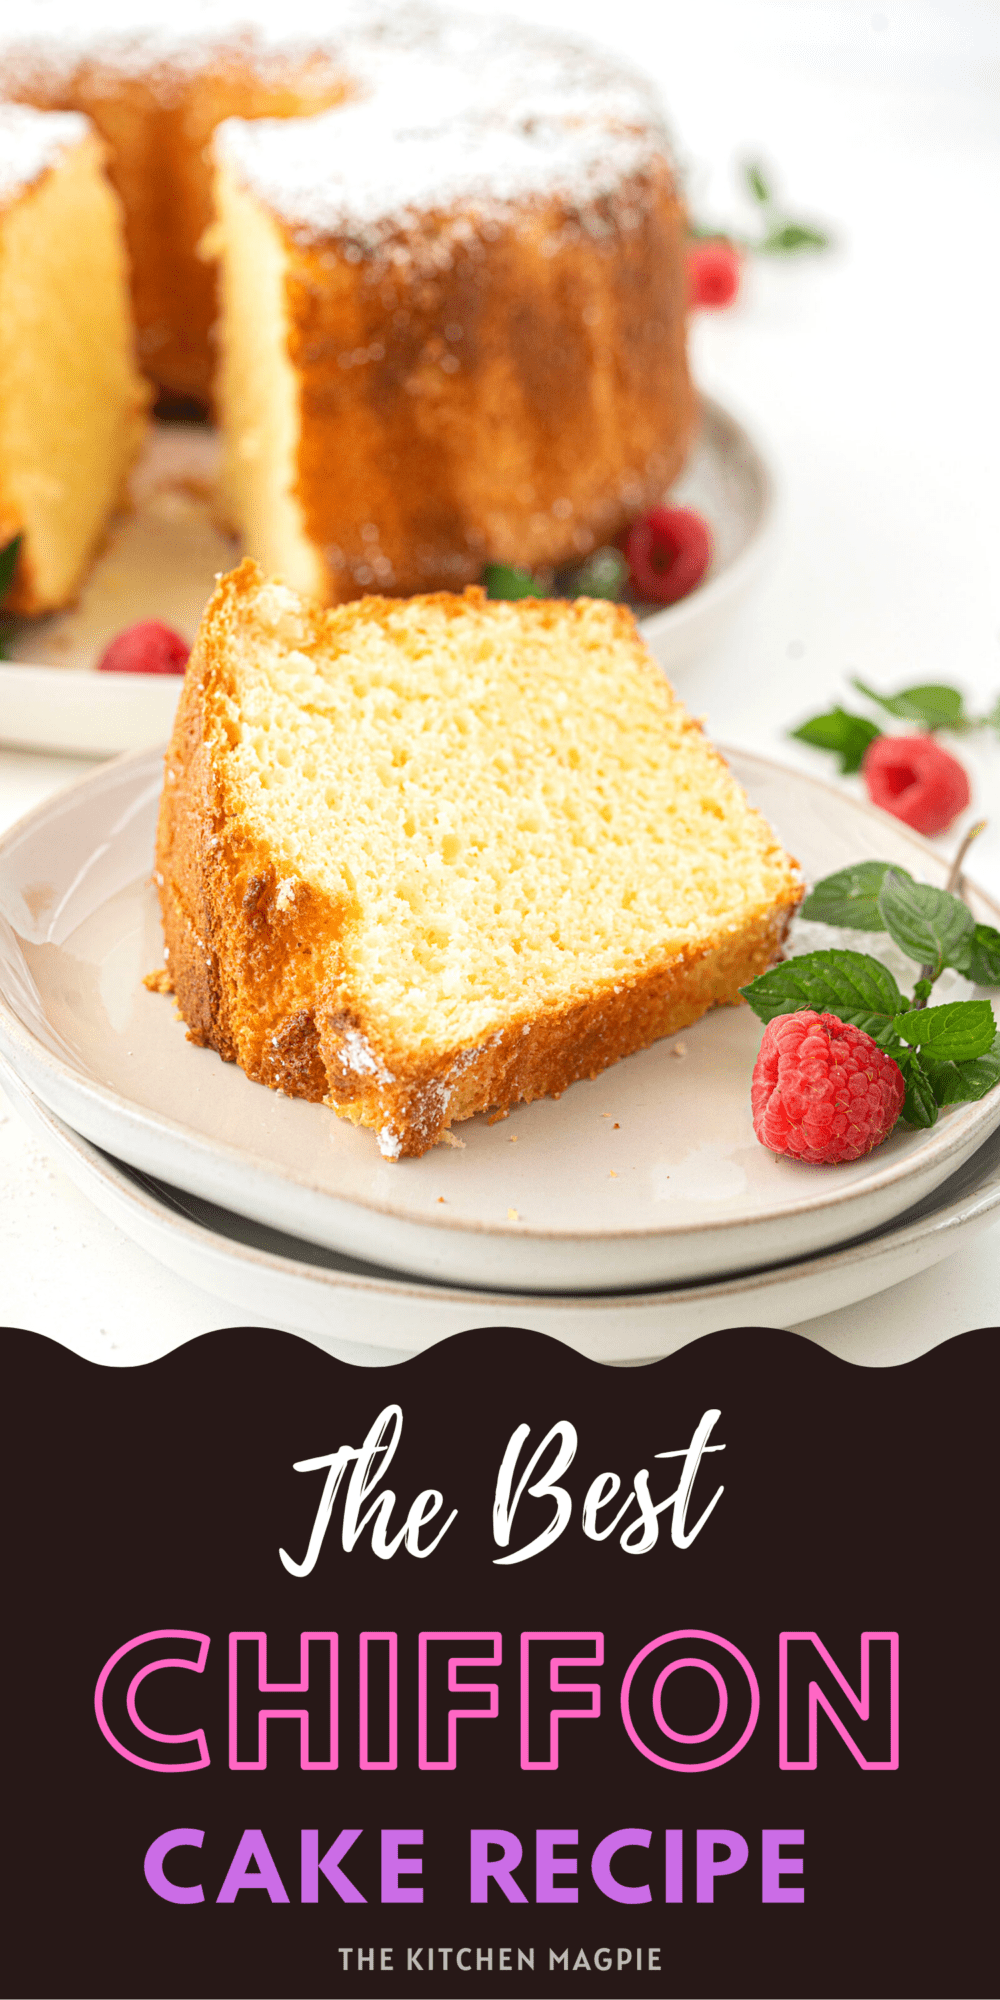 This classic 7 egg chiffon cake recipe is a fluffy, light as air cake that my Mom has been making since the 80's! I also have versions for her lemon and her poppy seed cakes as well.